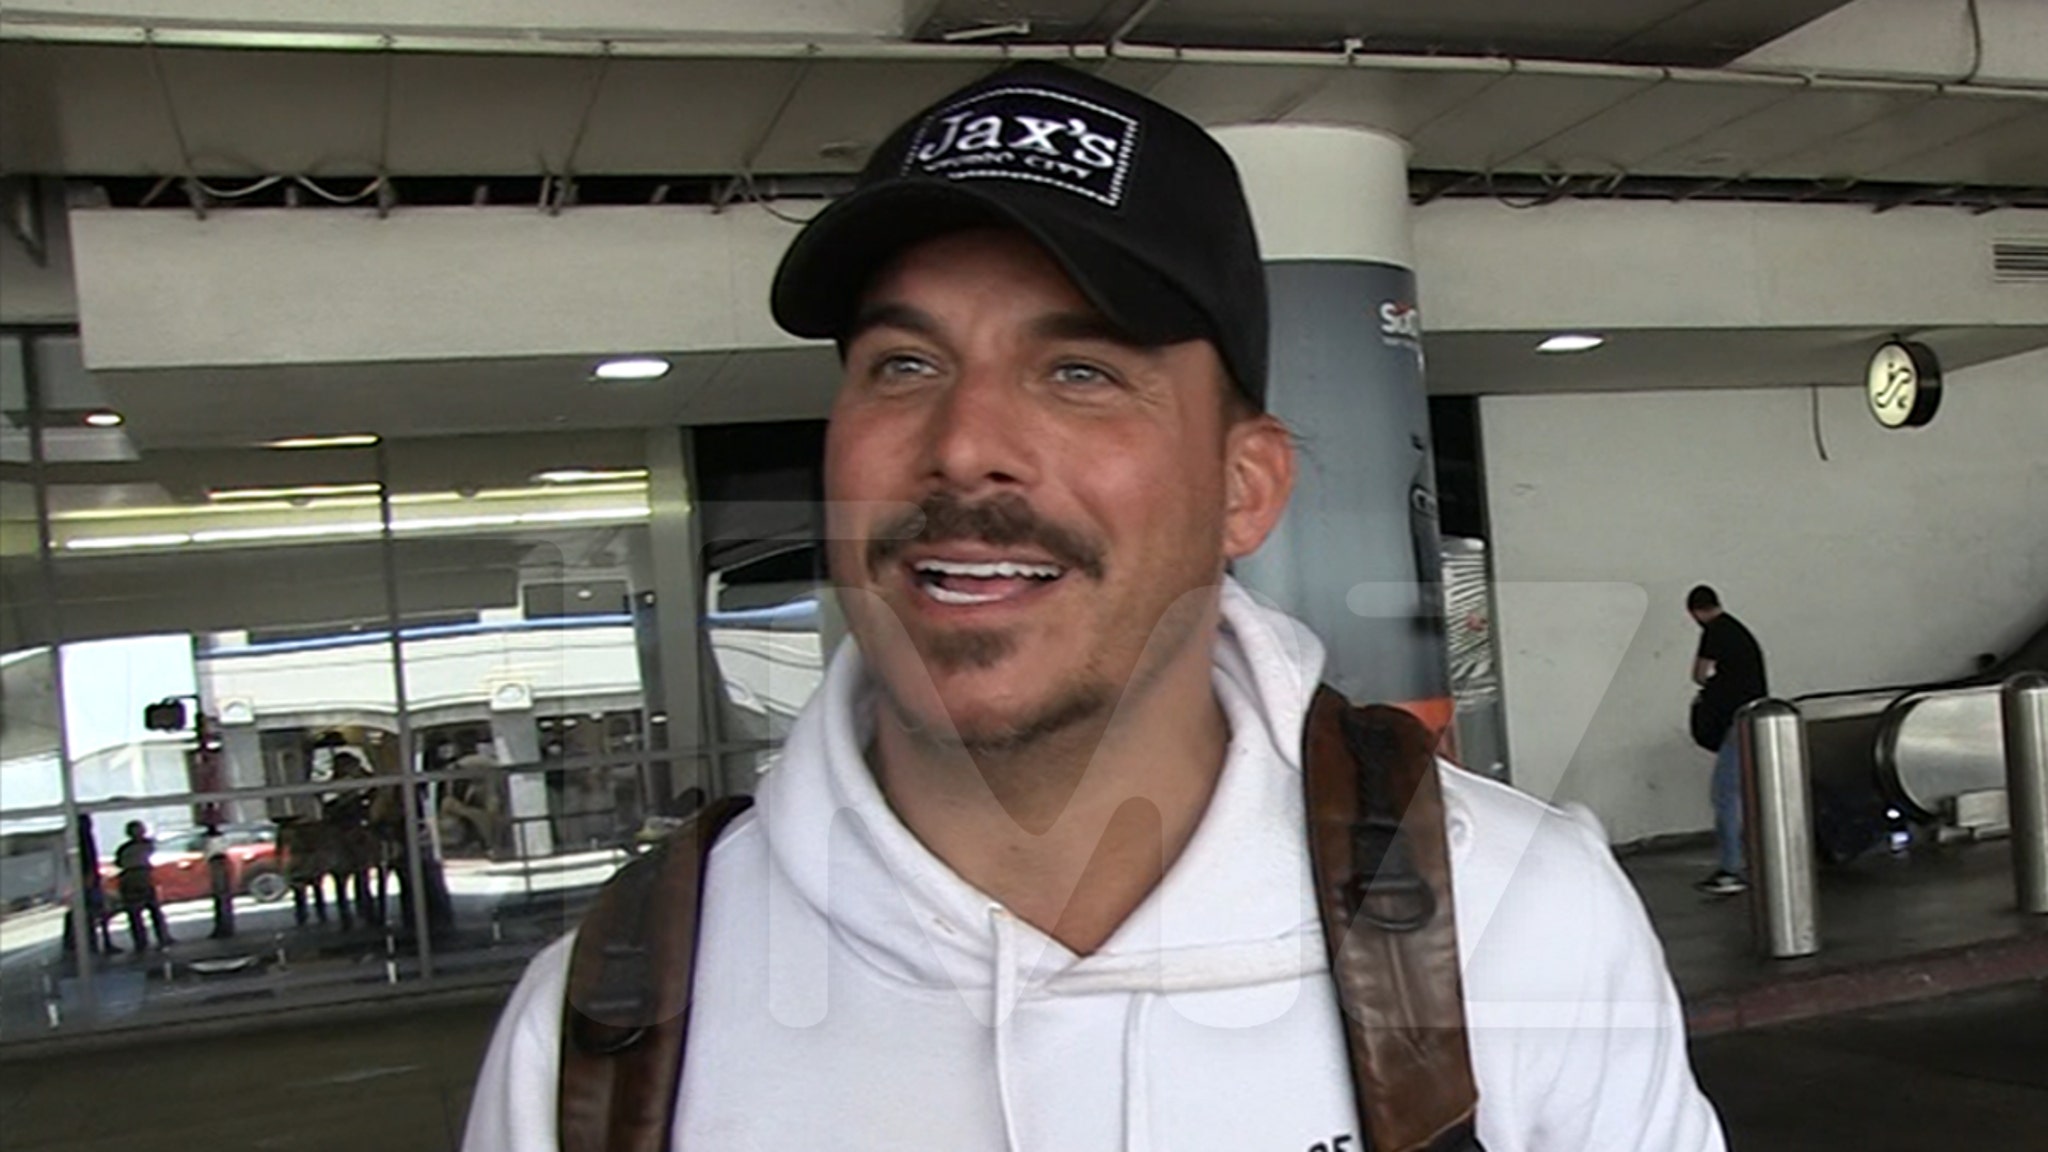 Jax Taylor wants to separate from his estranged wife Brittany Cartwright